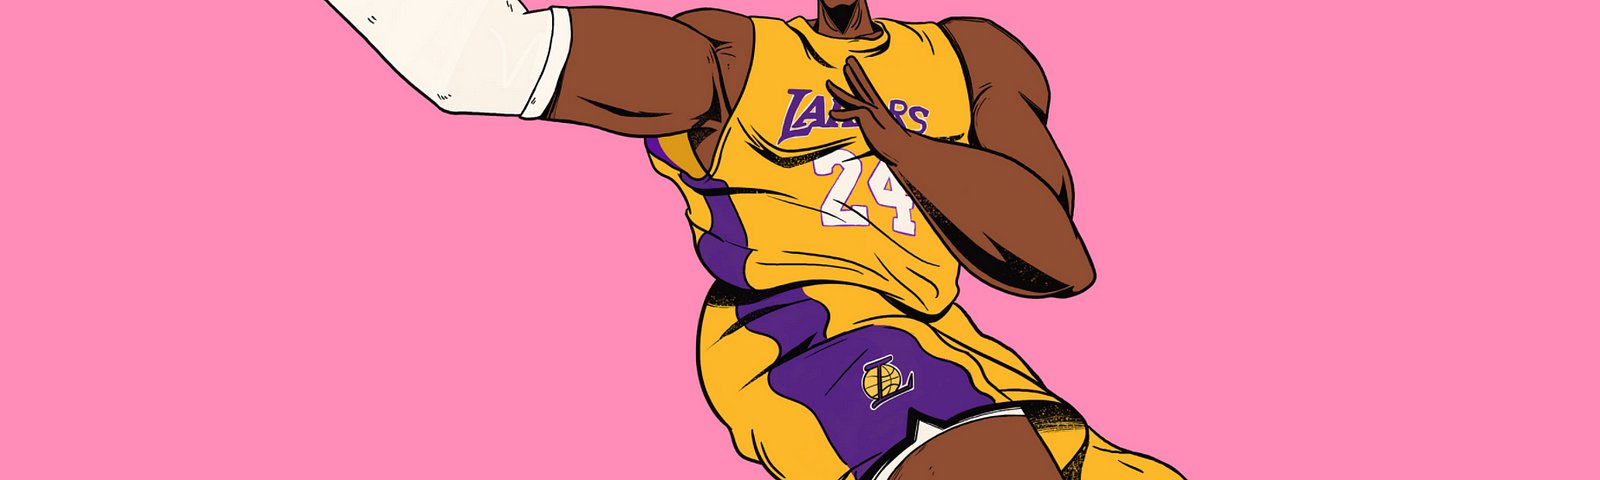 An illustration of Kobe Bryant with his Lakers jersey in a motion making a. layup.